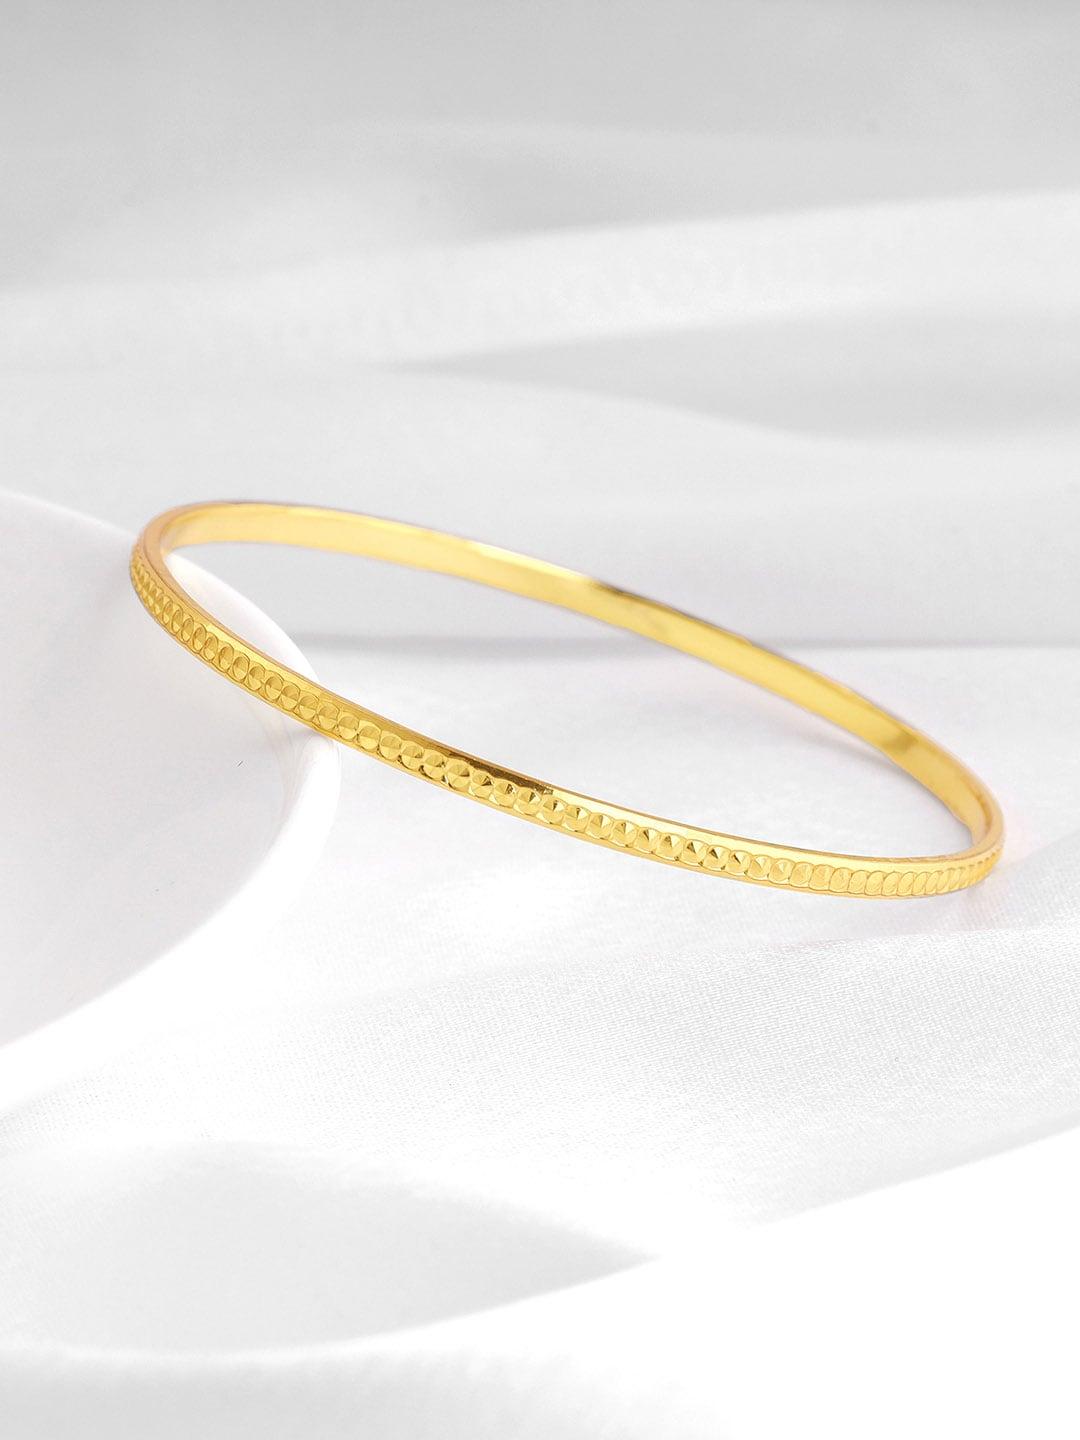 giva-925-sterling-silver-gold-plated-crater-cuts-bangle